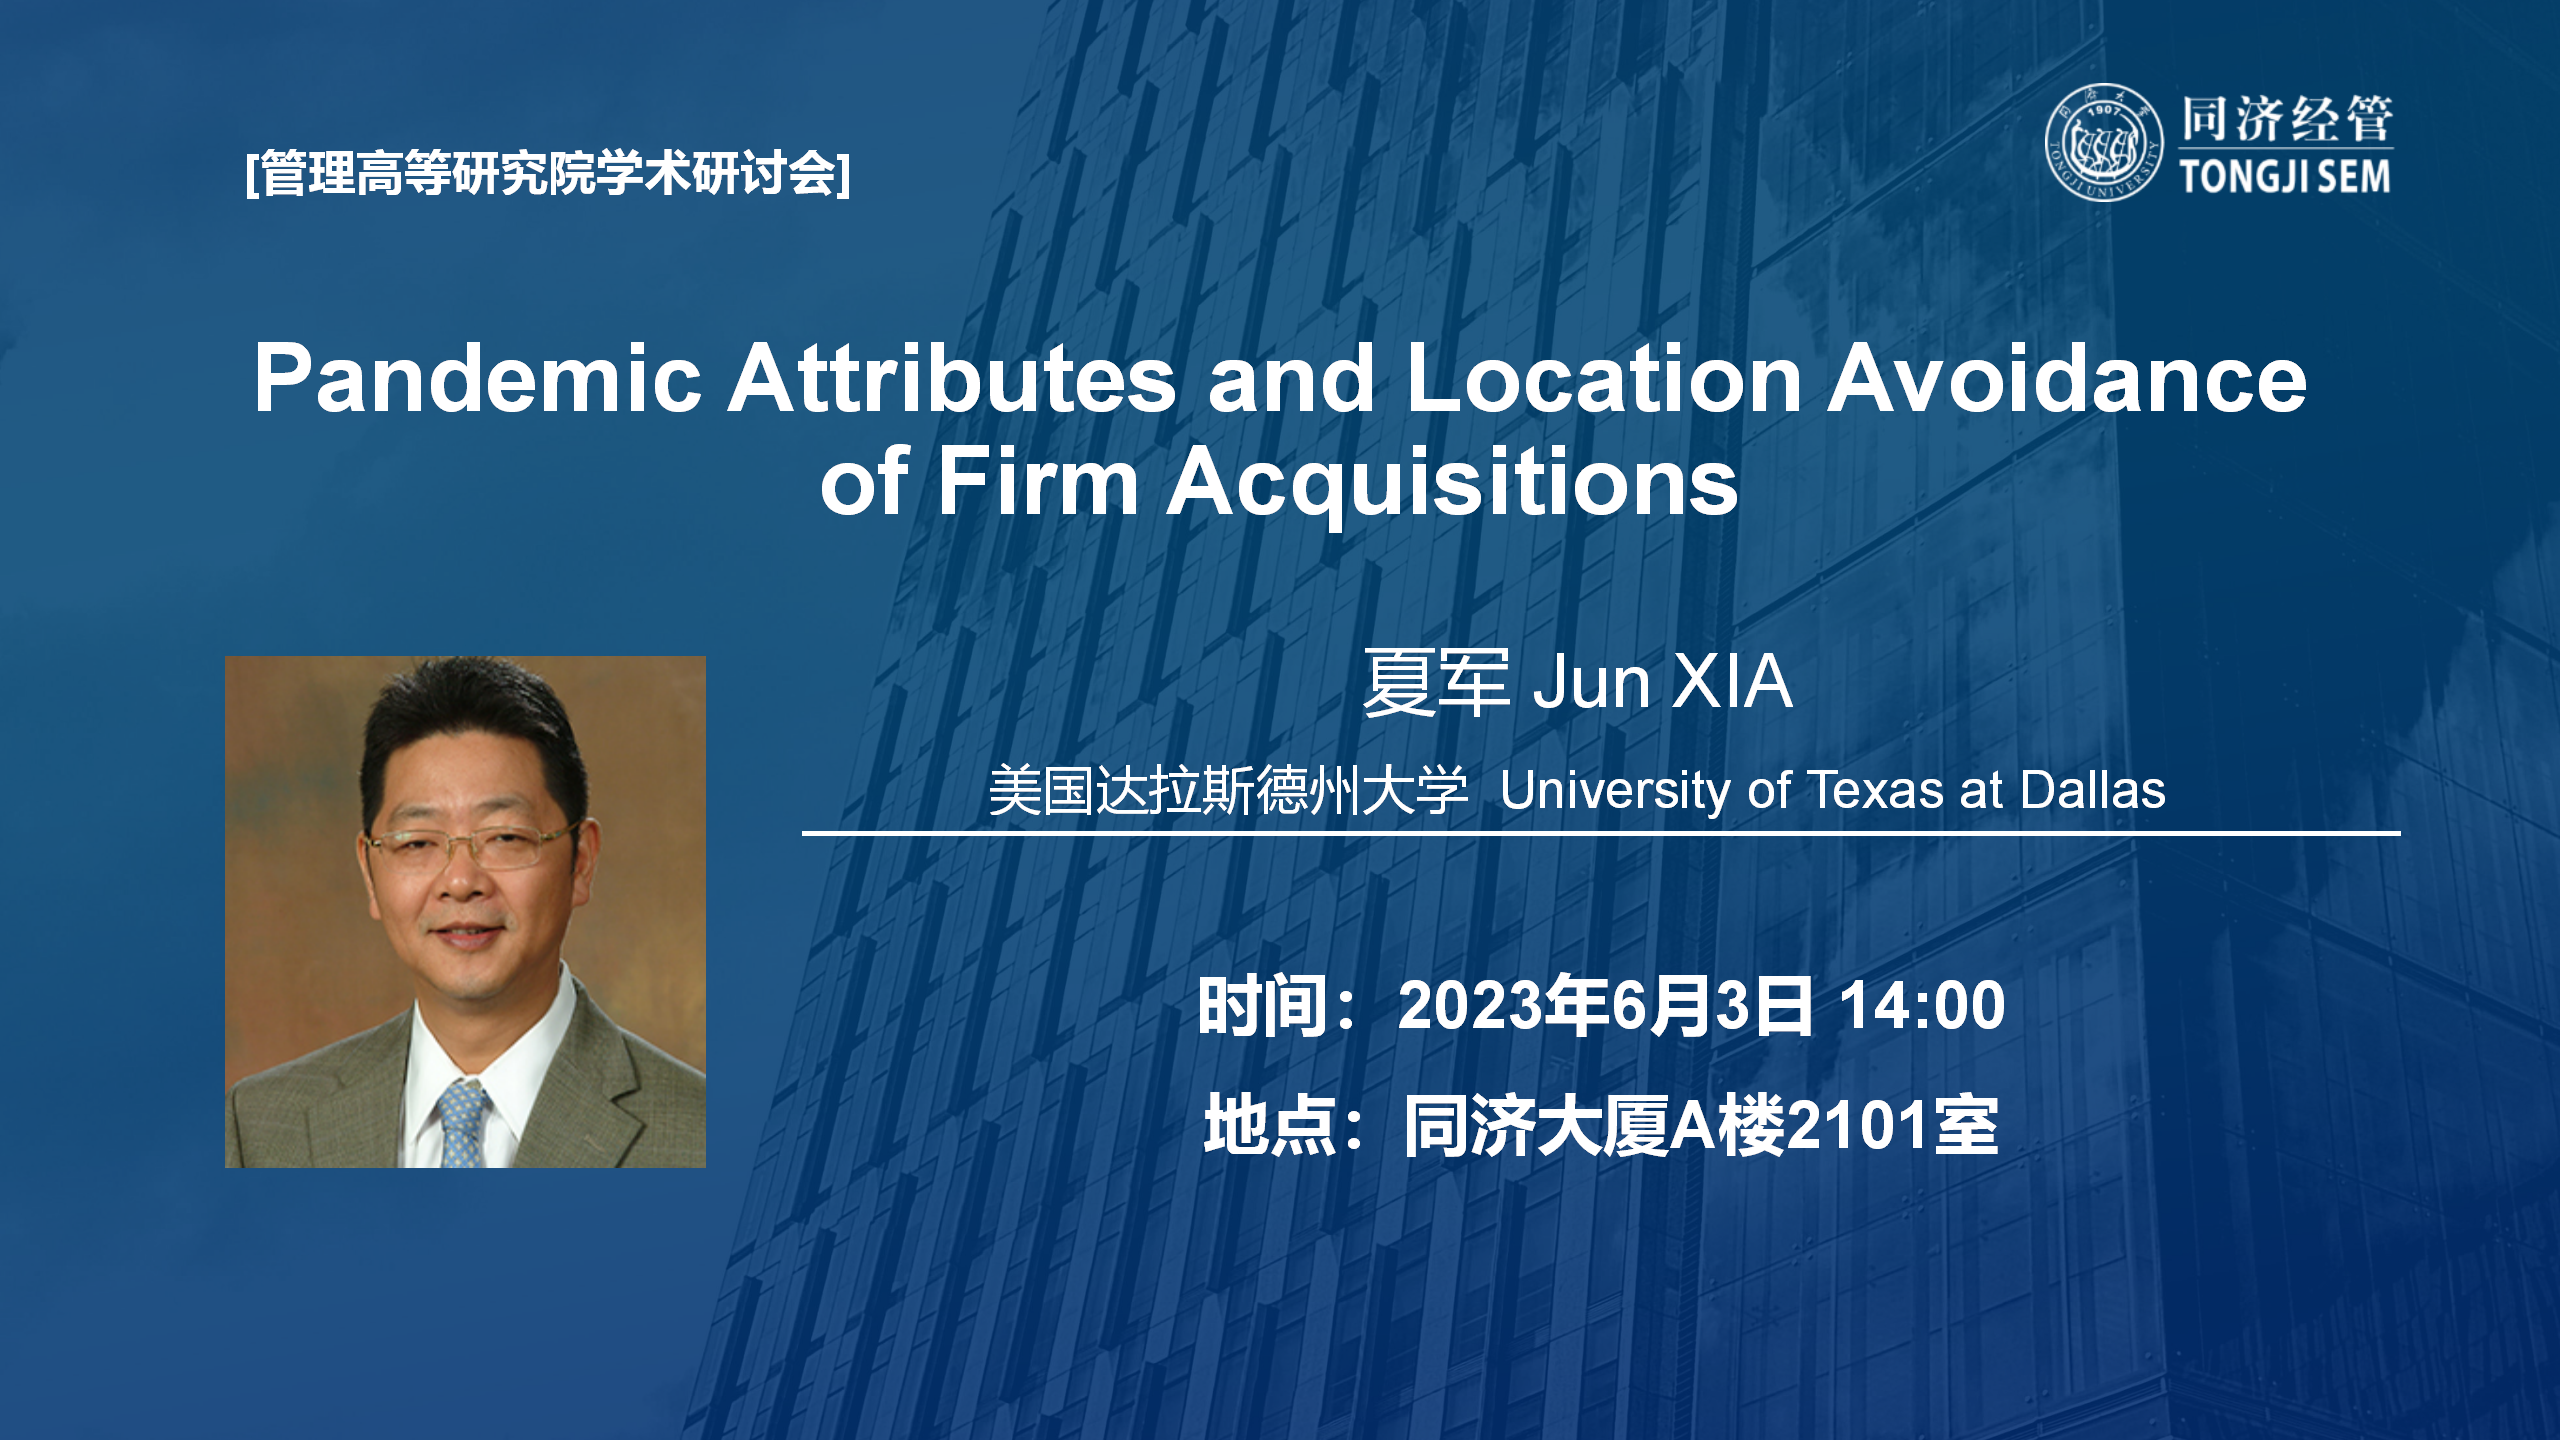 Pandemic Attributes and Location Avoidance of Firm Acquisitions